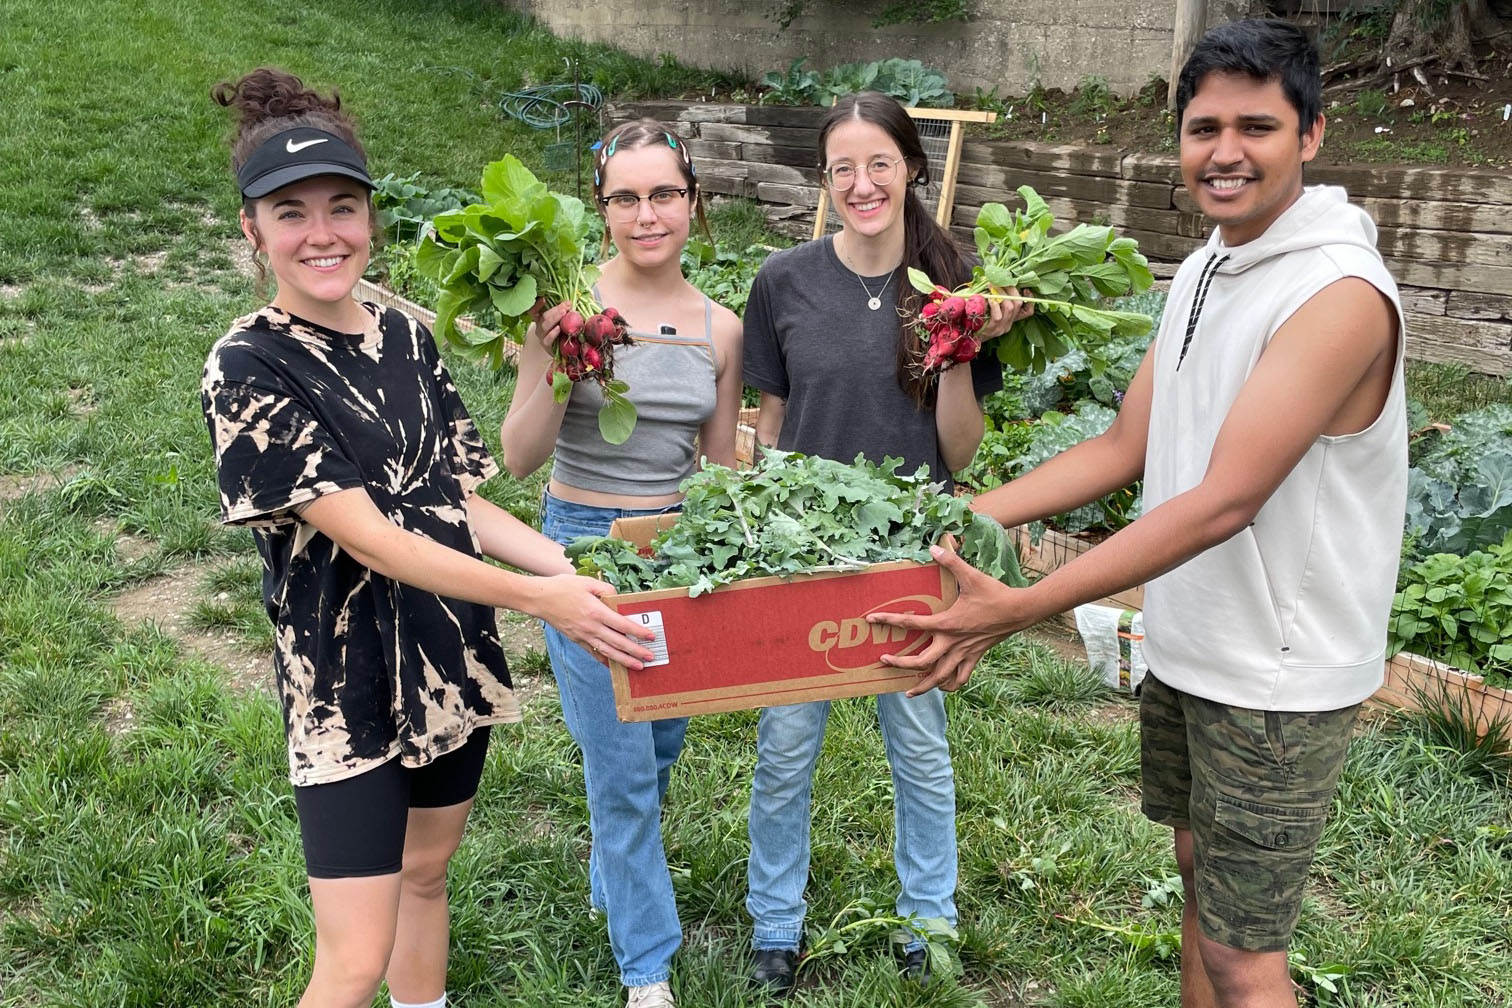 From left&comma; students Julia Quigley of the UNMC College of Public Health&comma; Caroline Case of the Eppley Institute for Research in Cancer and Allied Diseases&comma; Sadie Allen of the Eppley Institute for Research in Cancer and Allied Diseases and Venkatesh Varadharaj of the UNMC College of Medicine hold the garden’s first donation to a local community group&period;